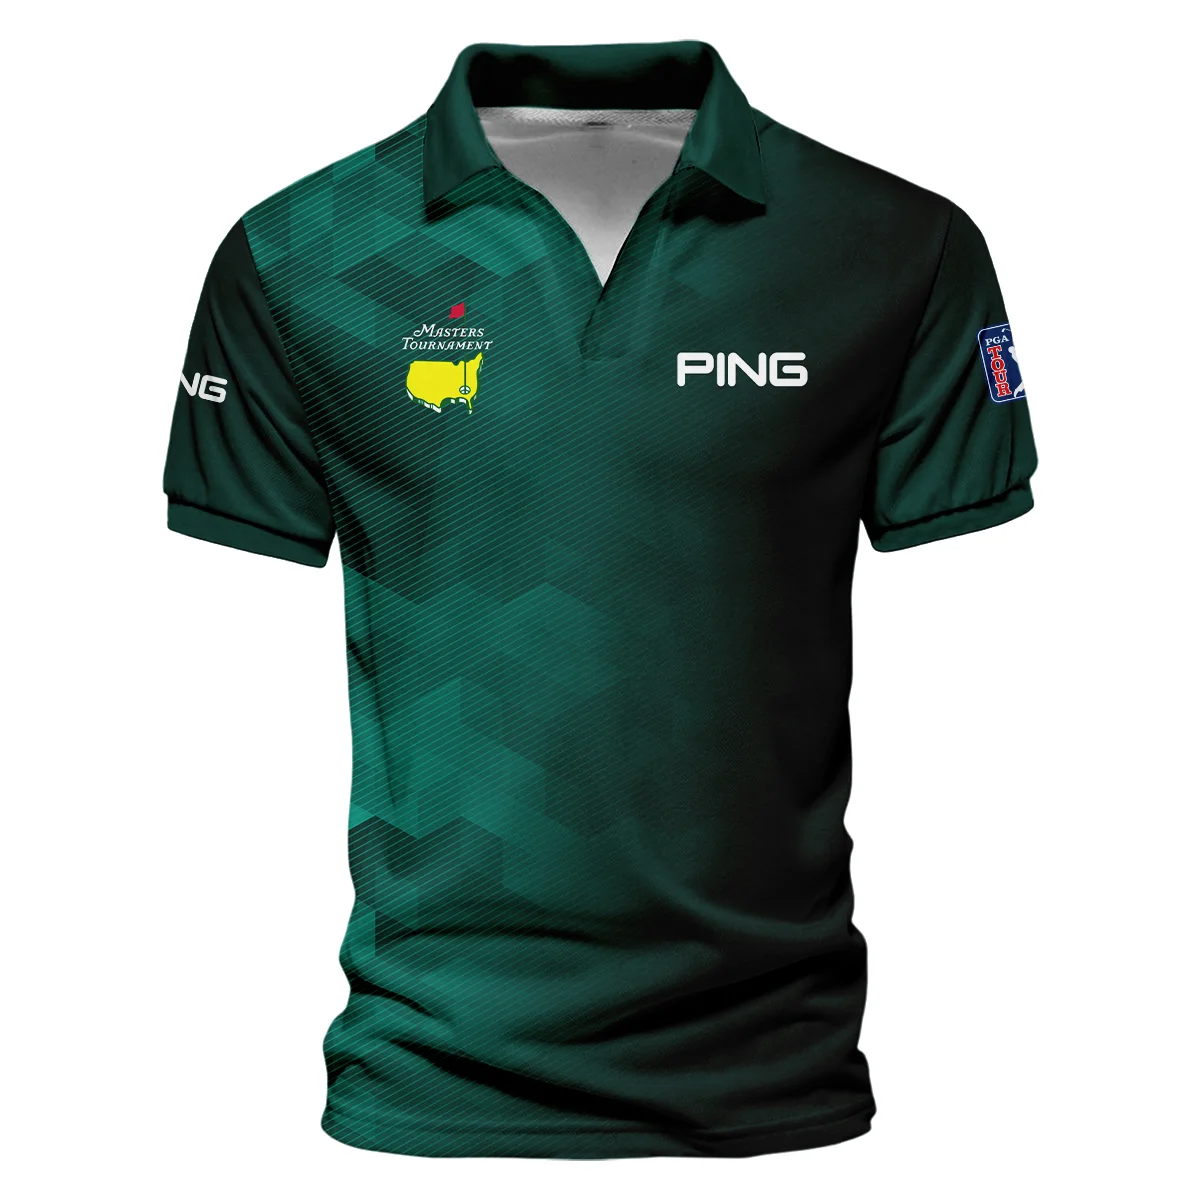 Ping Golf Sport Dark Green Gradient Abstract Background Masters Tournament Vneck Polo Shirt Style Classic Polo Shirt For Men